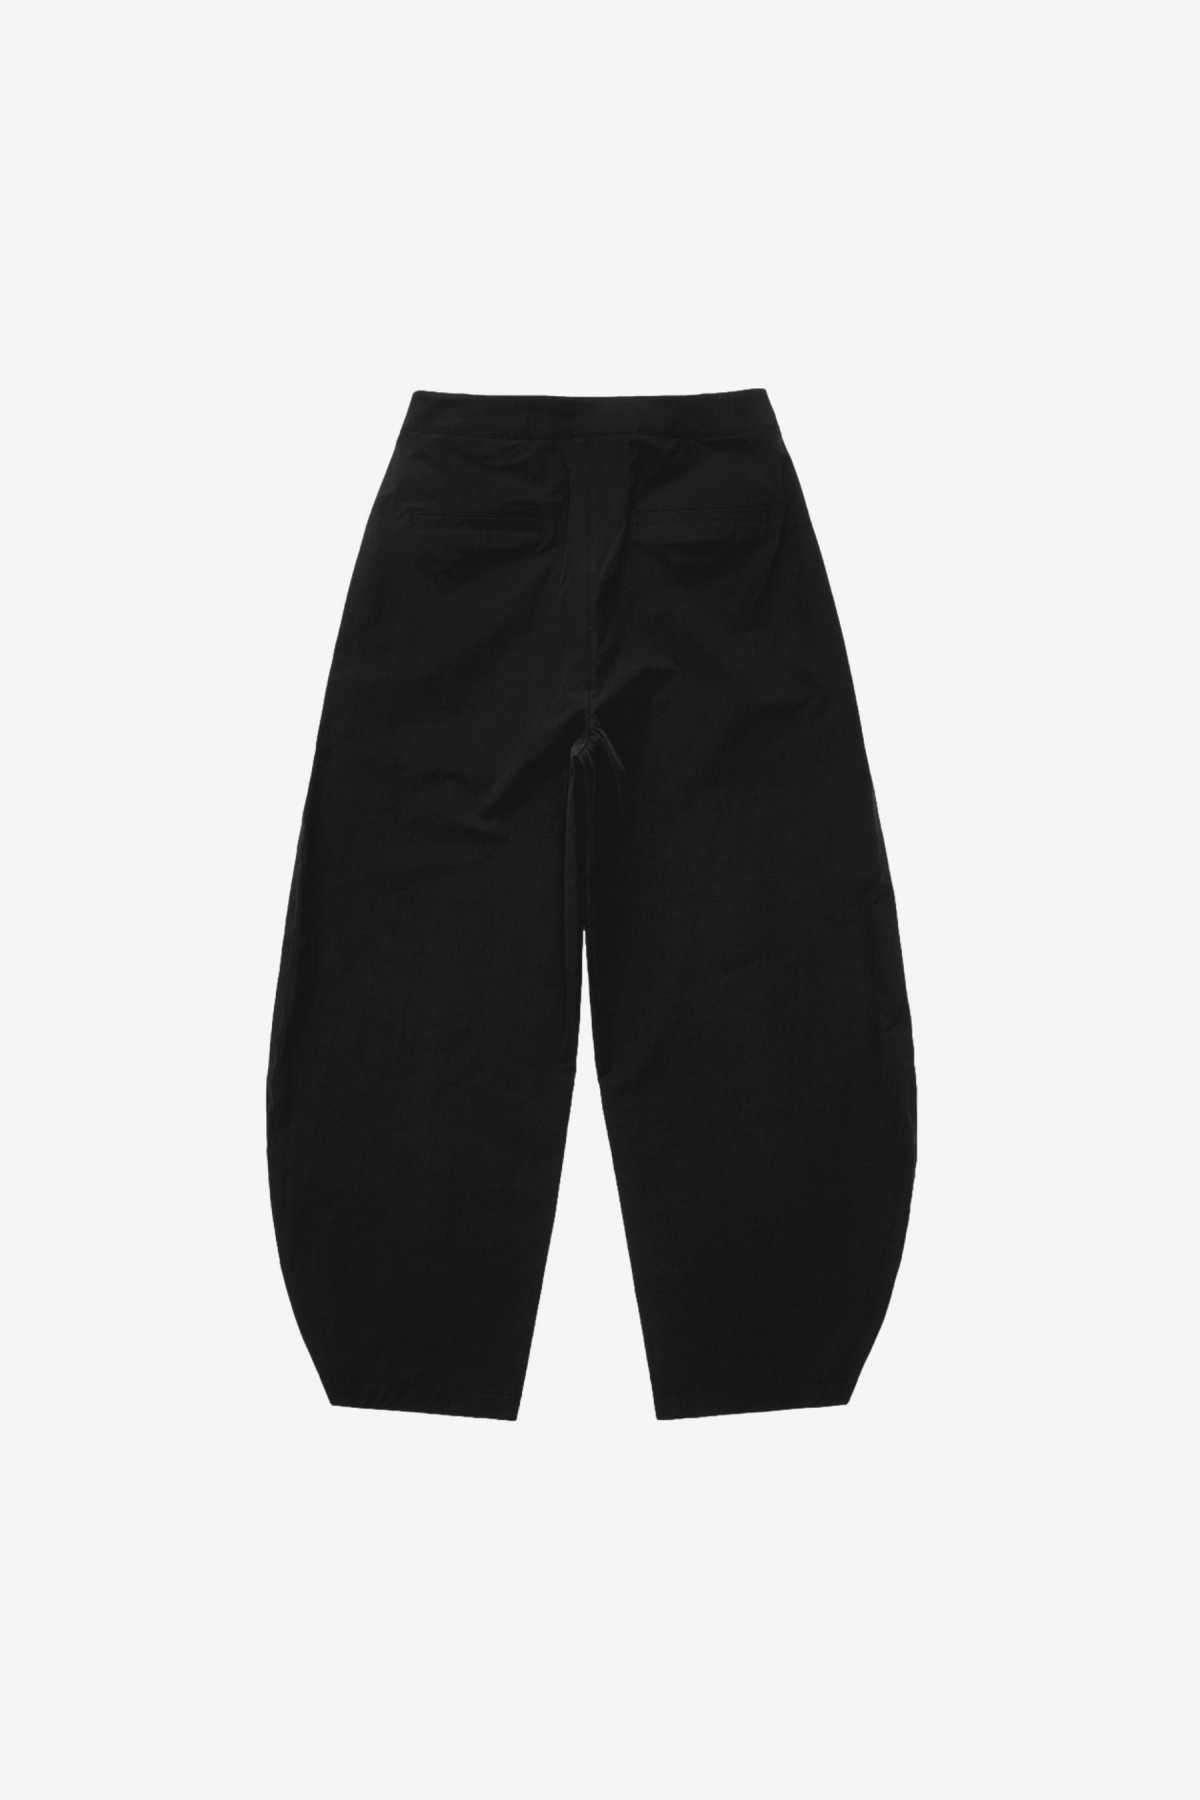 Amomento Curved Leg Pants in Black